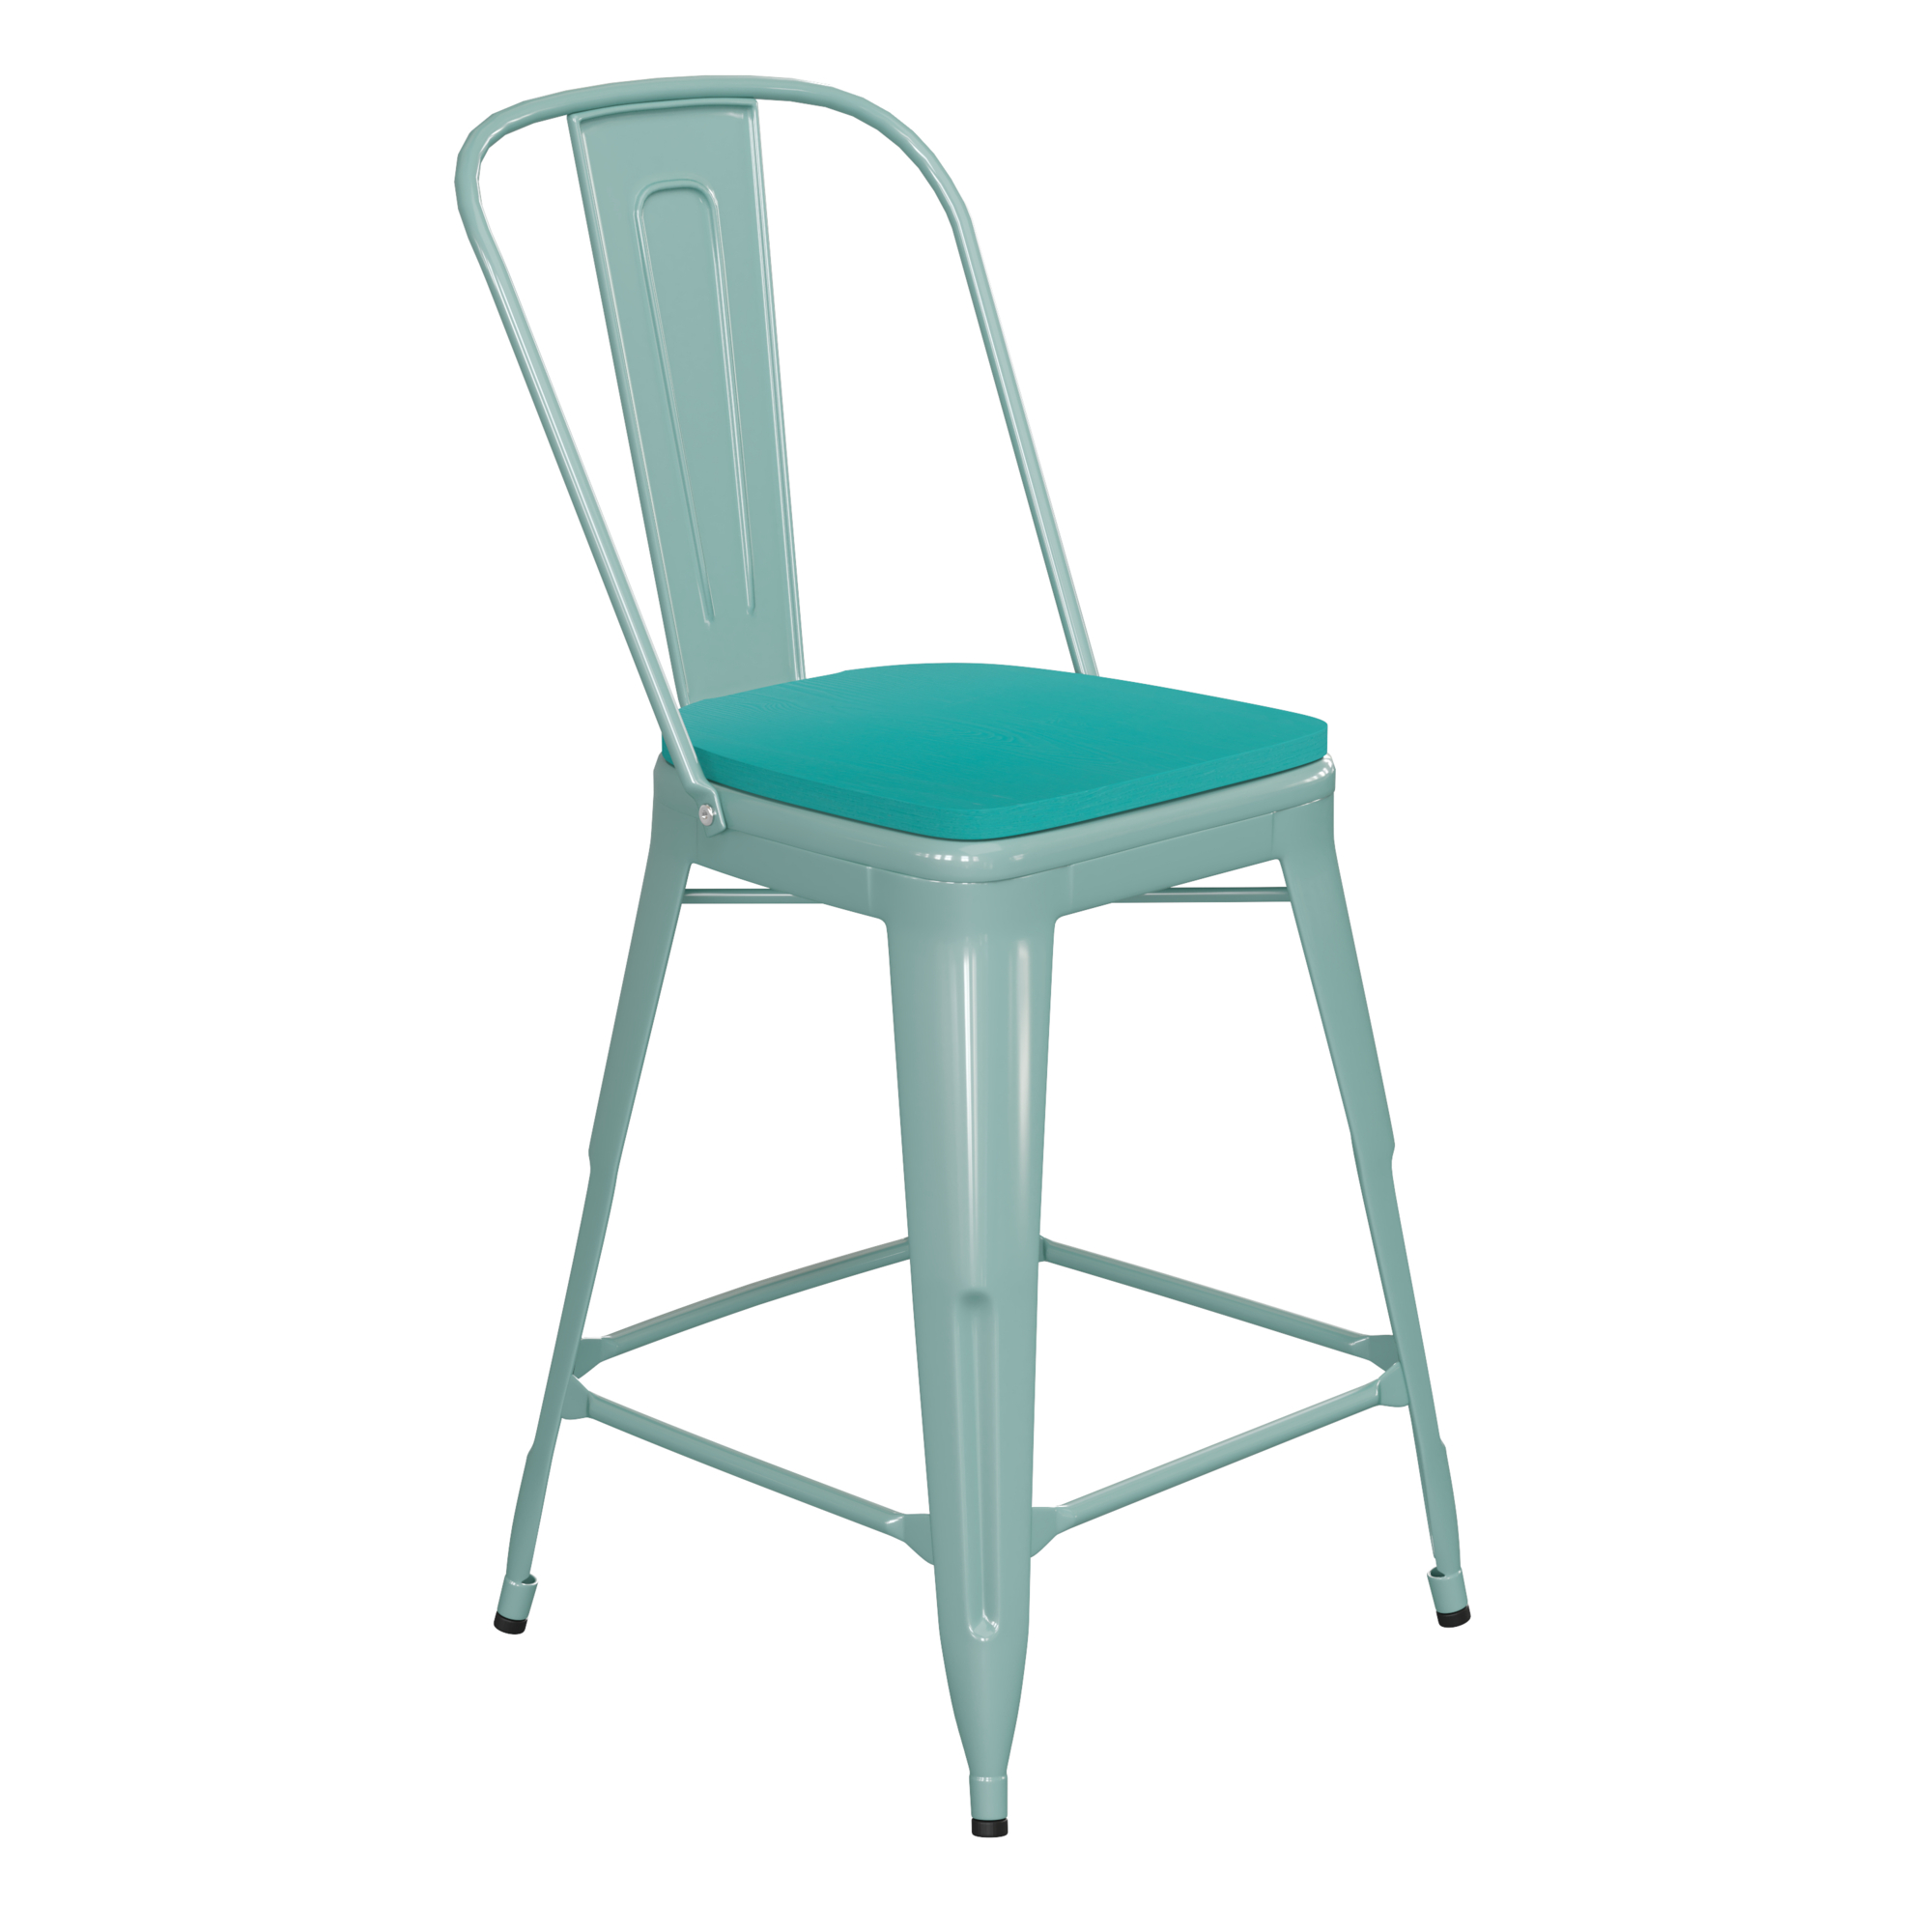 Flash Furniture, Mint Green Metal Stool with Mint Poly Seat, Primary Color Green, Included (qty.) 1, Model ET353424MINTP1M